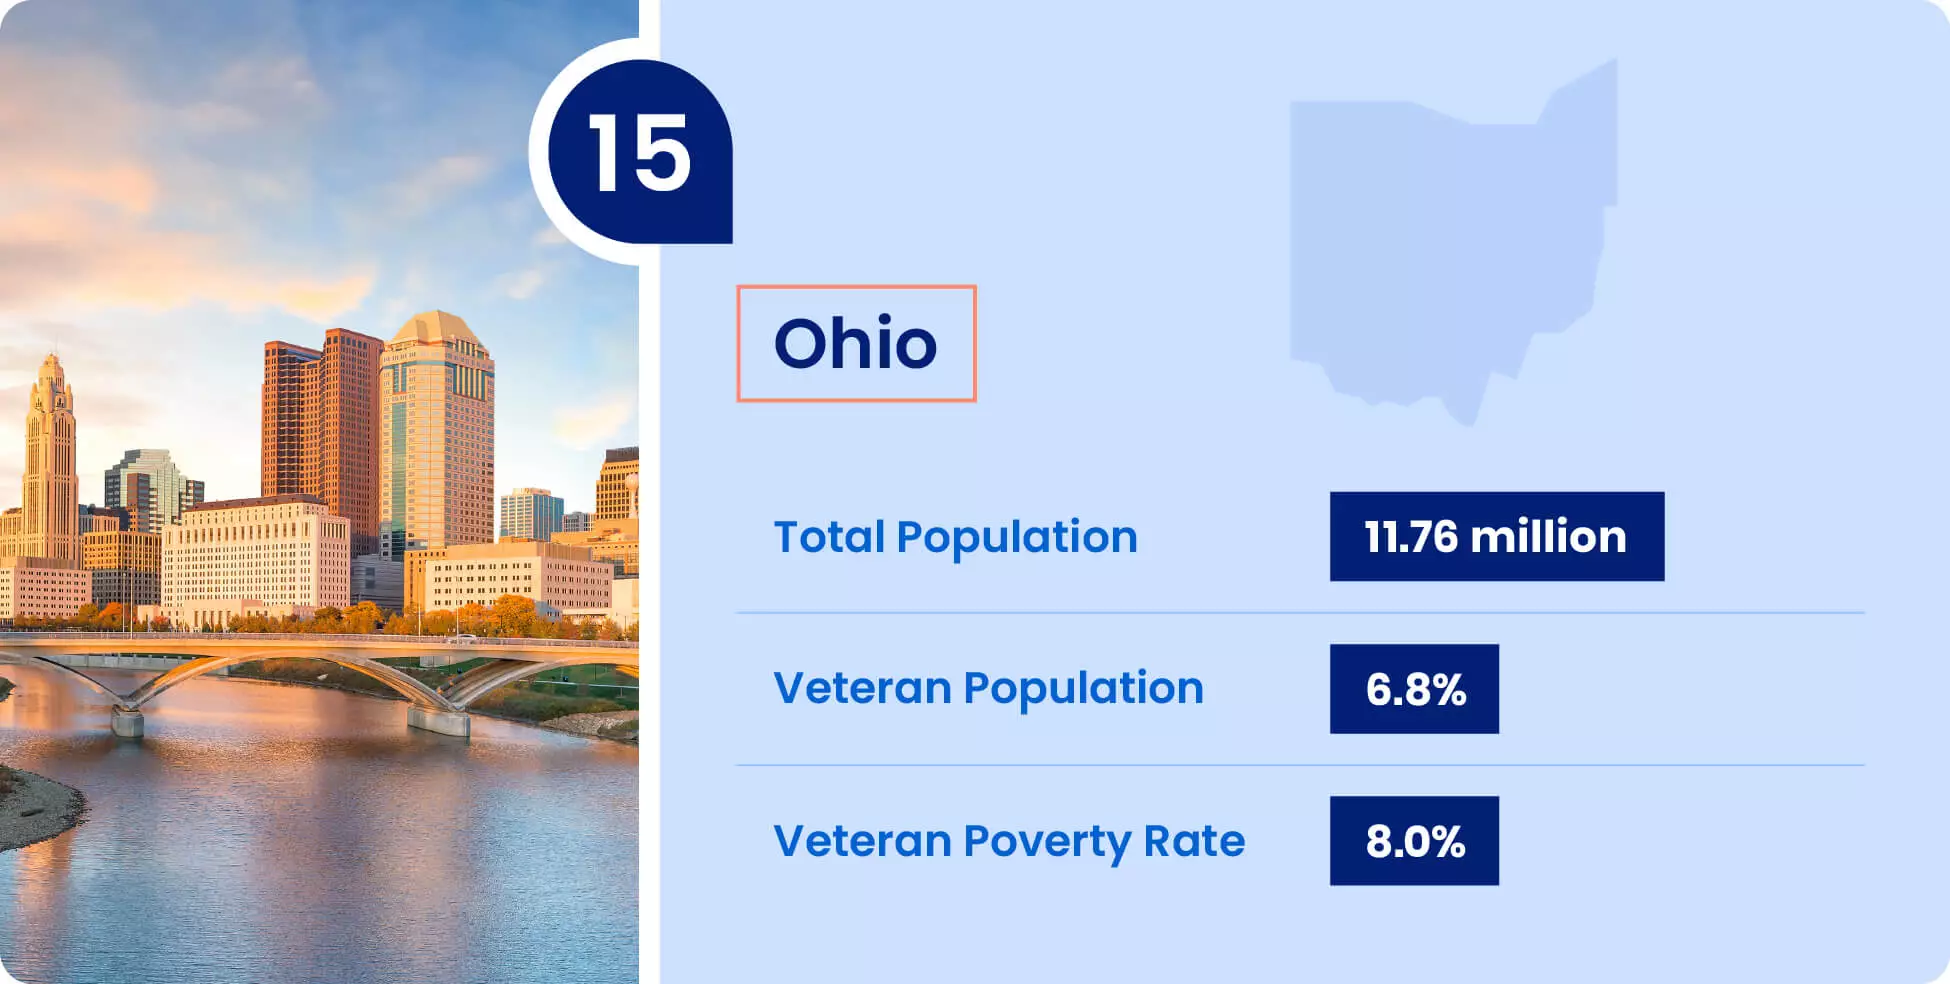 Image shows key information for military retirees thinking of moving to Ohio.